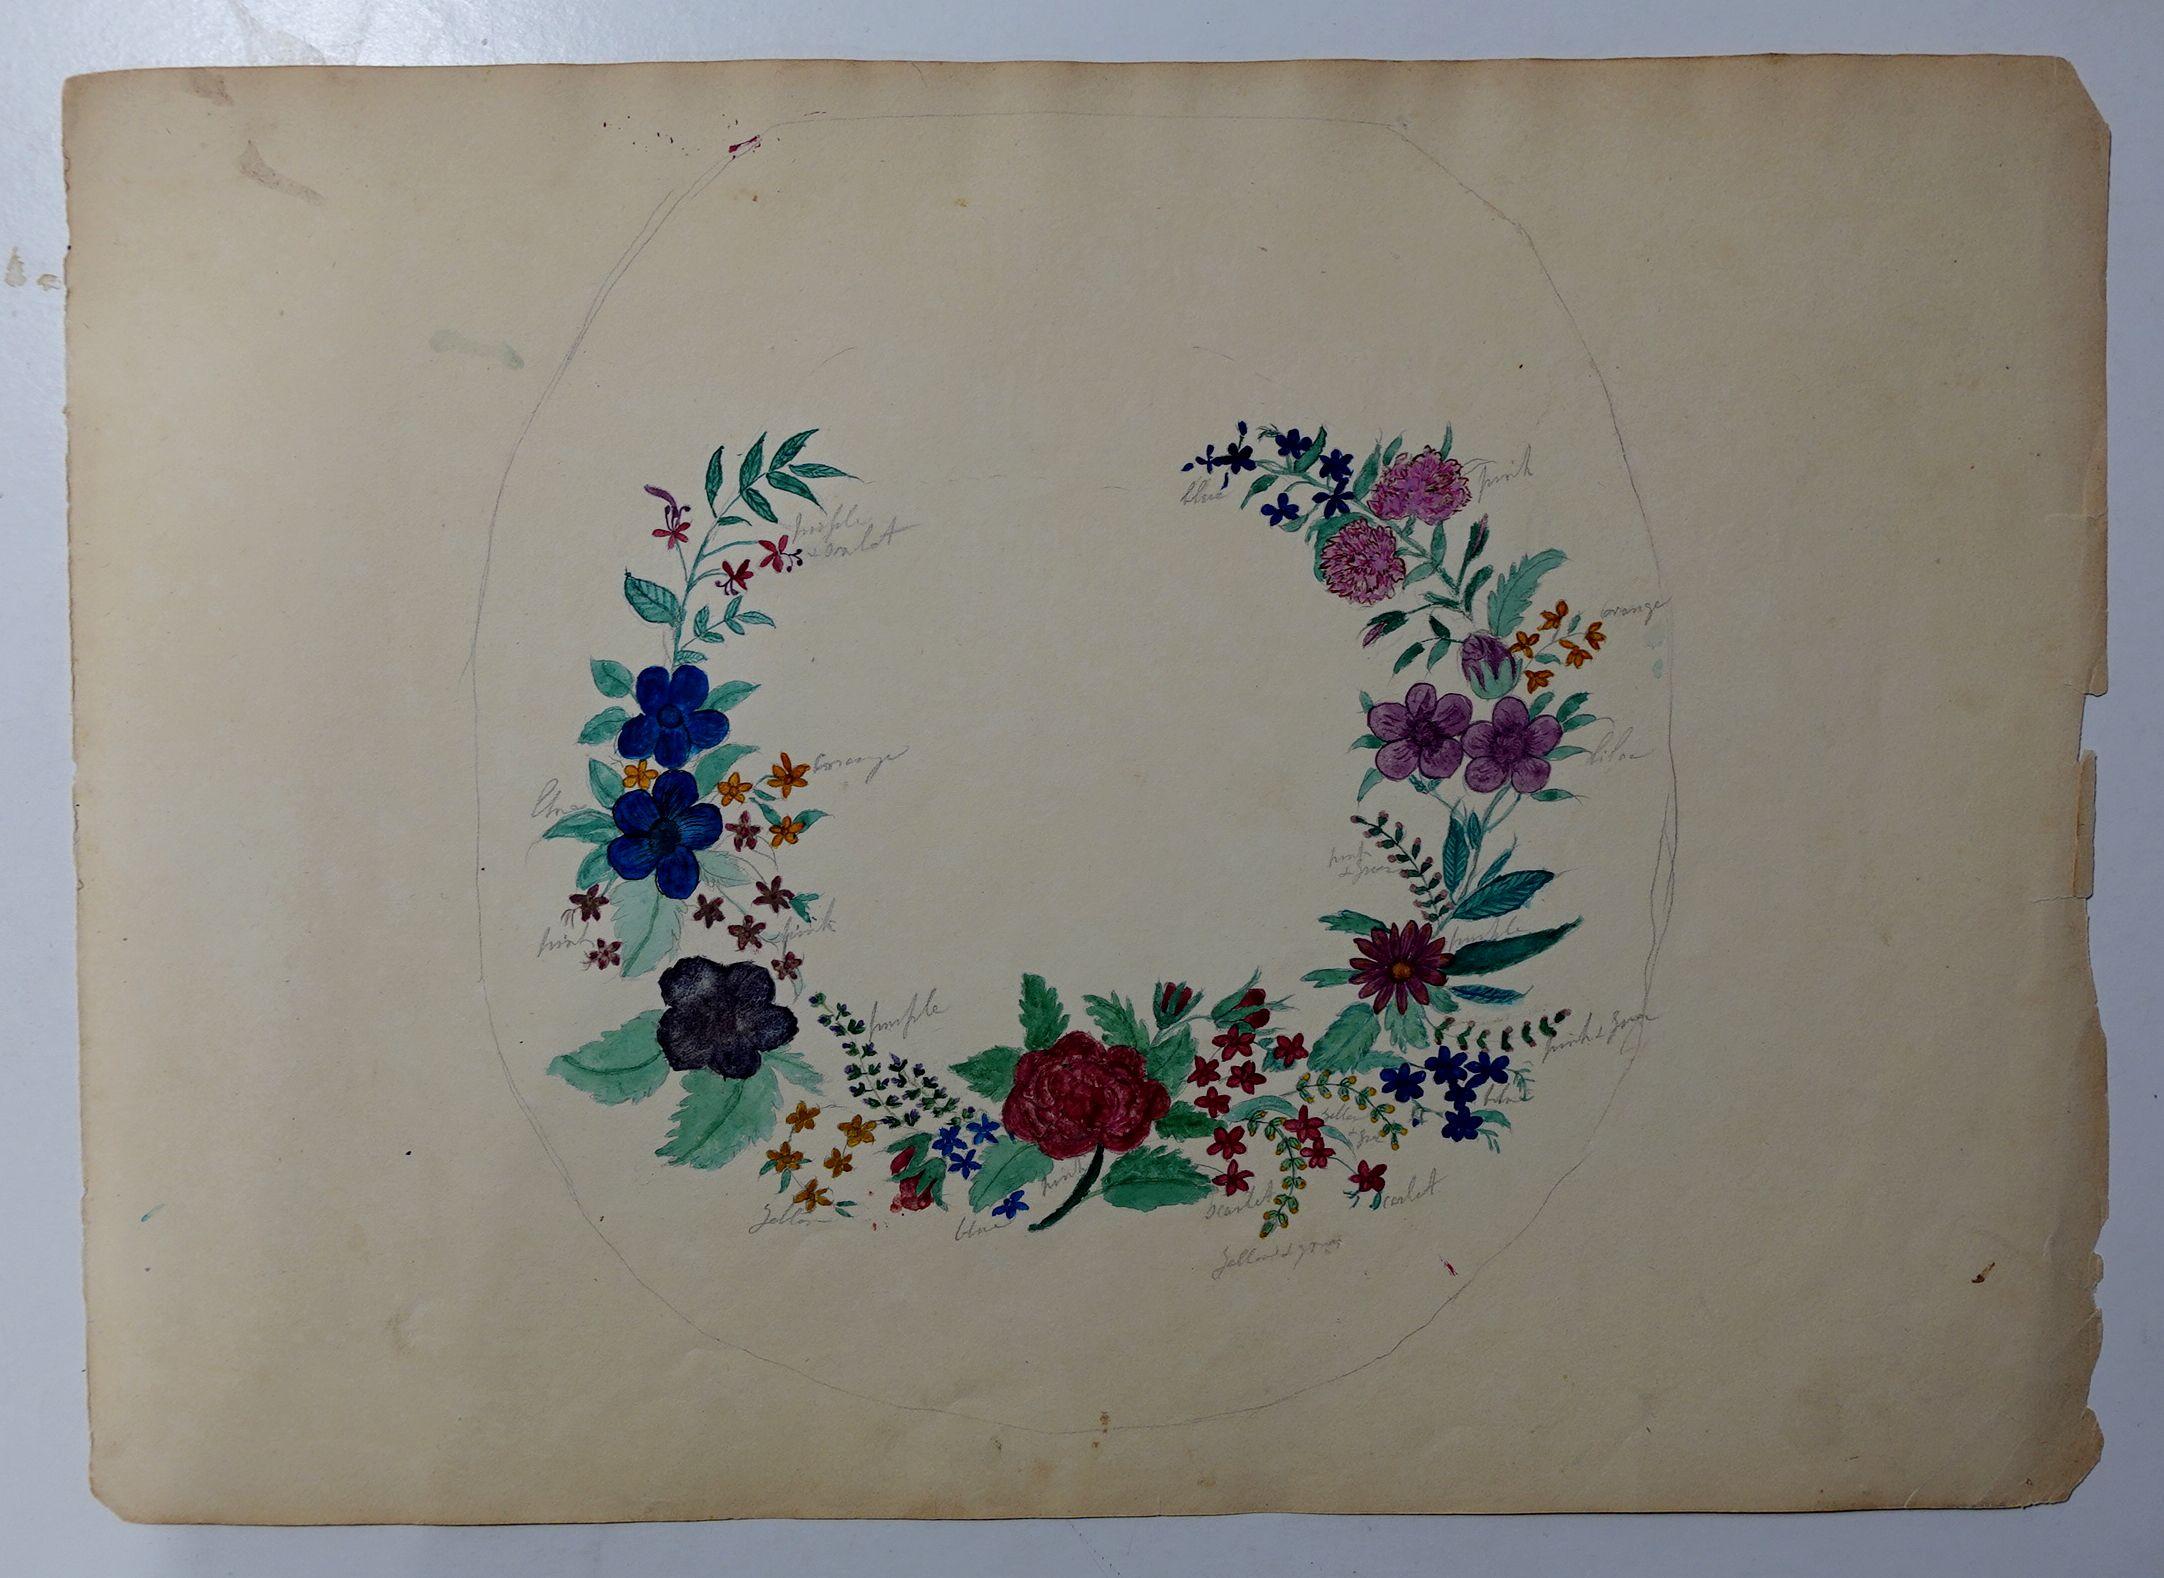 1820s album of floral and botanical watercolors, original watercolor 10 paintings and all painted by hand. Belonging to Elizabeth Carr of St. Annes. Each watercolor is labeled from nature along with the species type, except for the first image of a